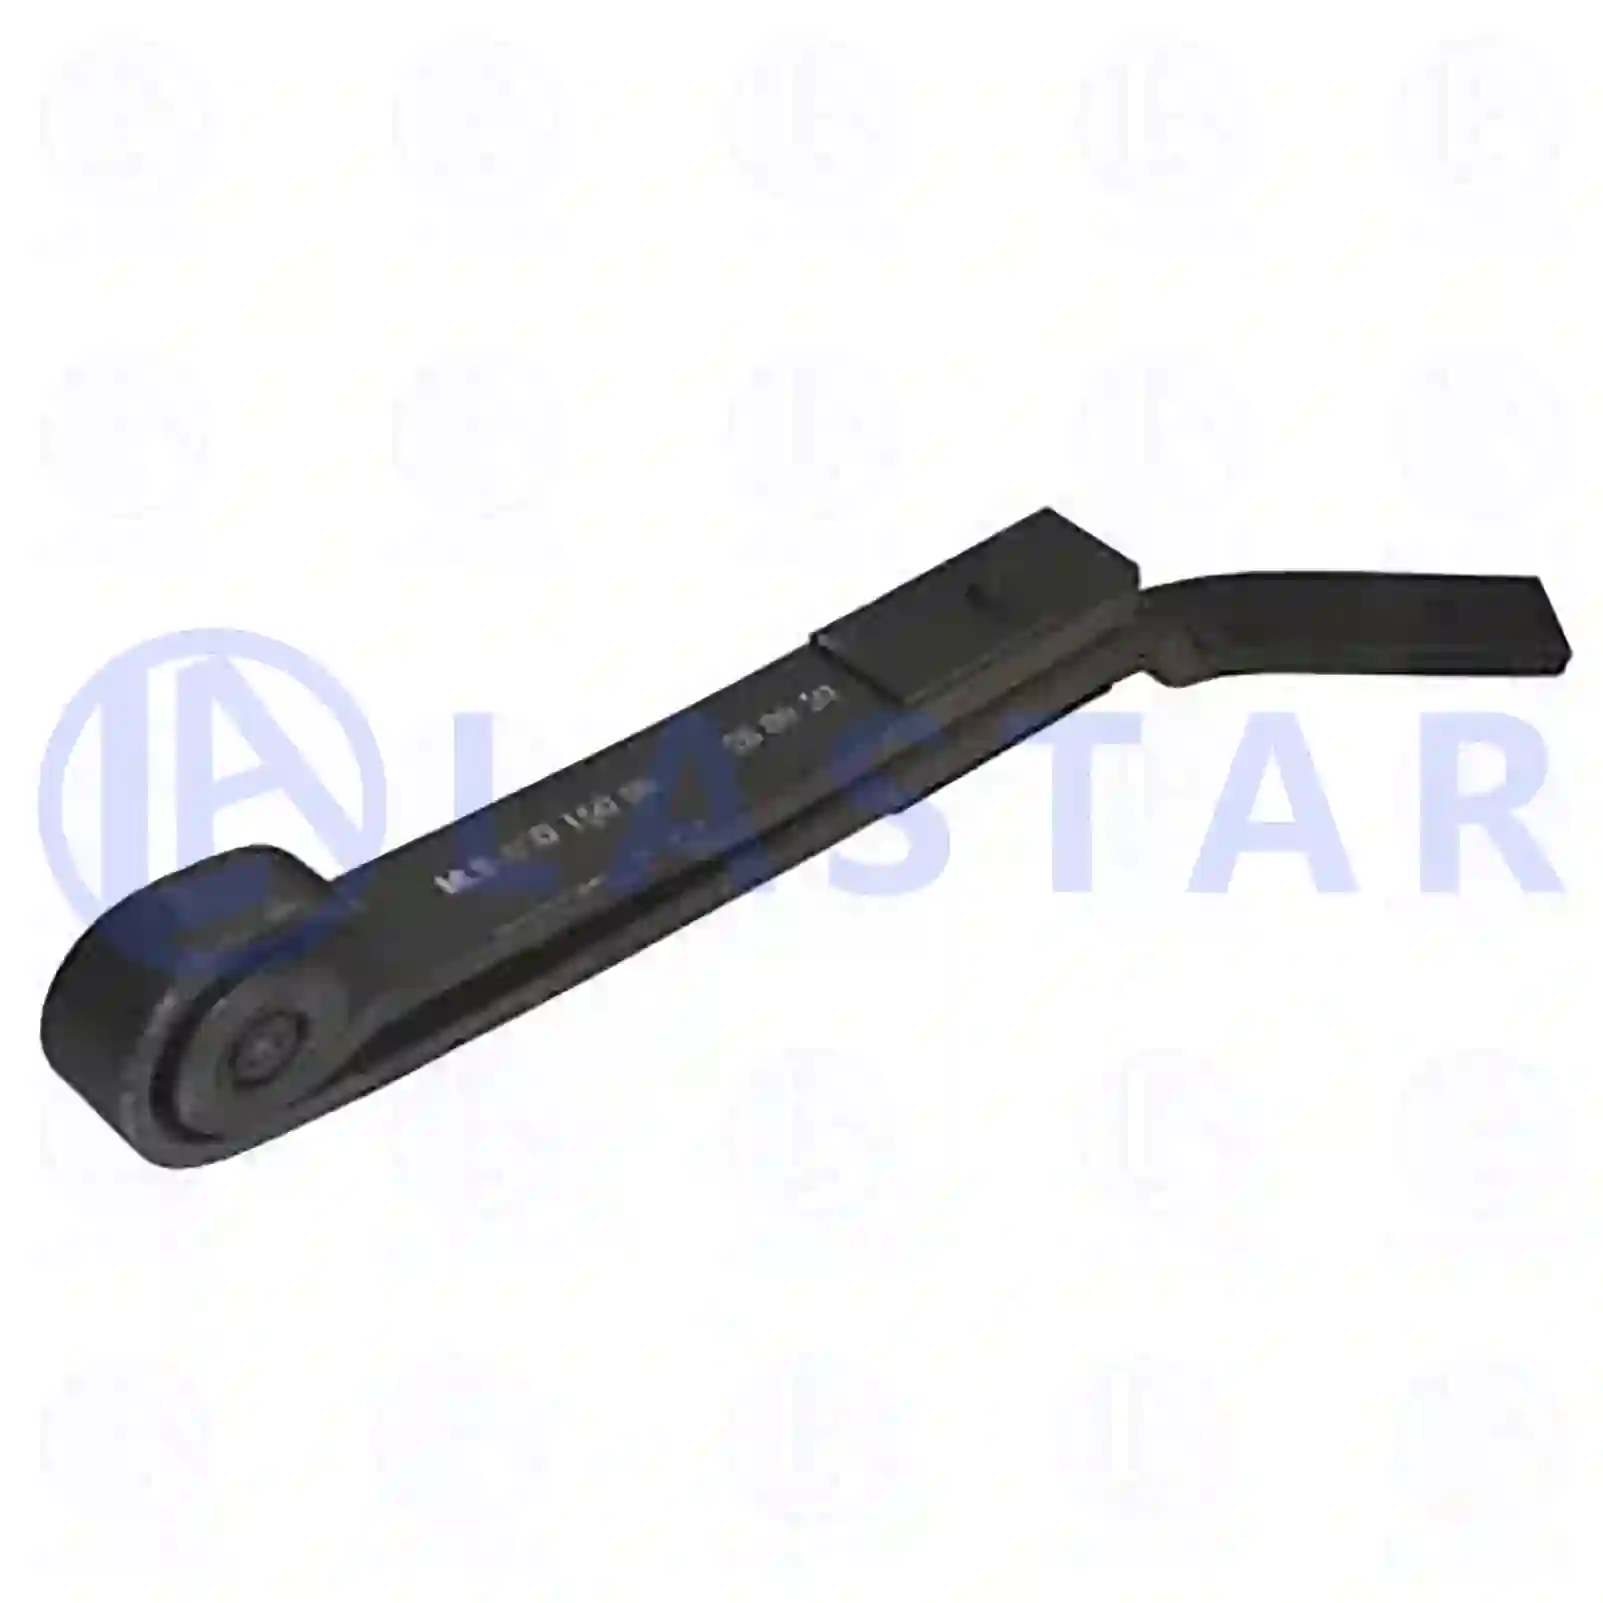 Leaf spring, right, 77728778, 5010600024 ||  77728778 Lastar Spare Part | Truck Spare Parts, Auotomotive Spare Parts Leaf spring, right, 77728778, 5010600024 ||  77728778 Lastar Spare Part | Truck Spare Parts, Auotomotive Spare Parts